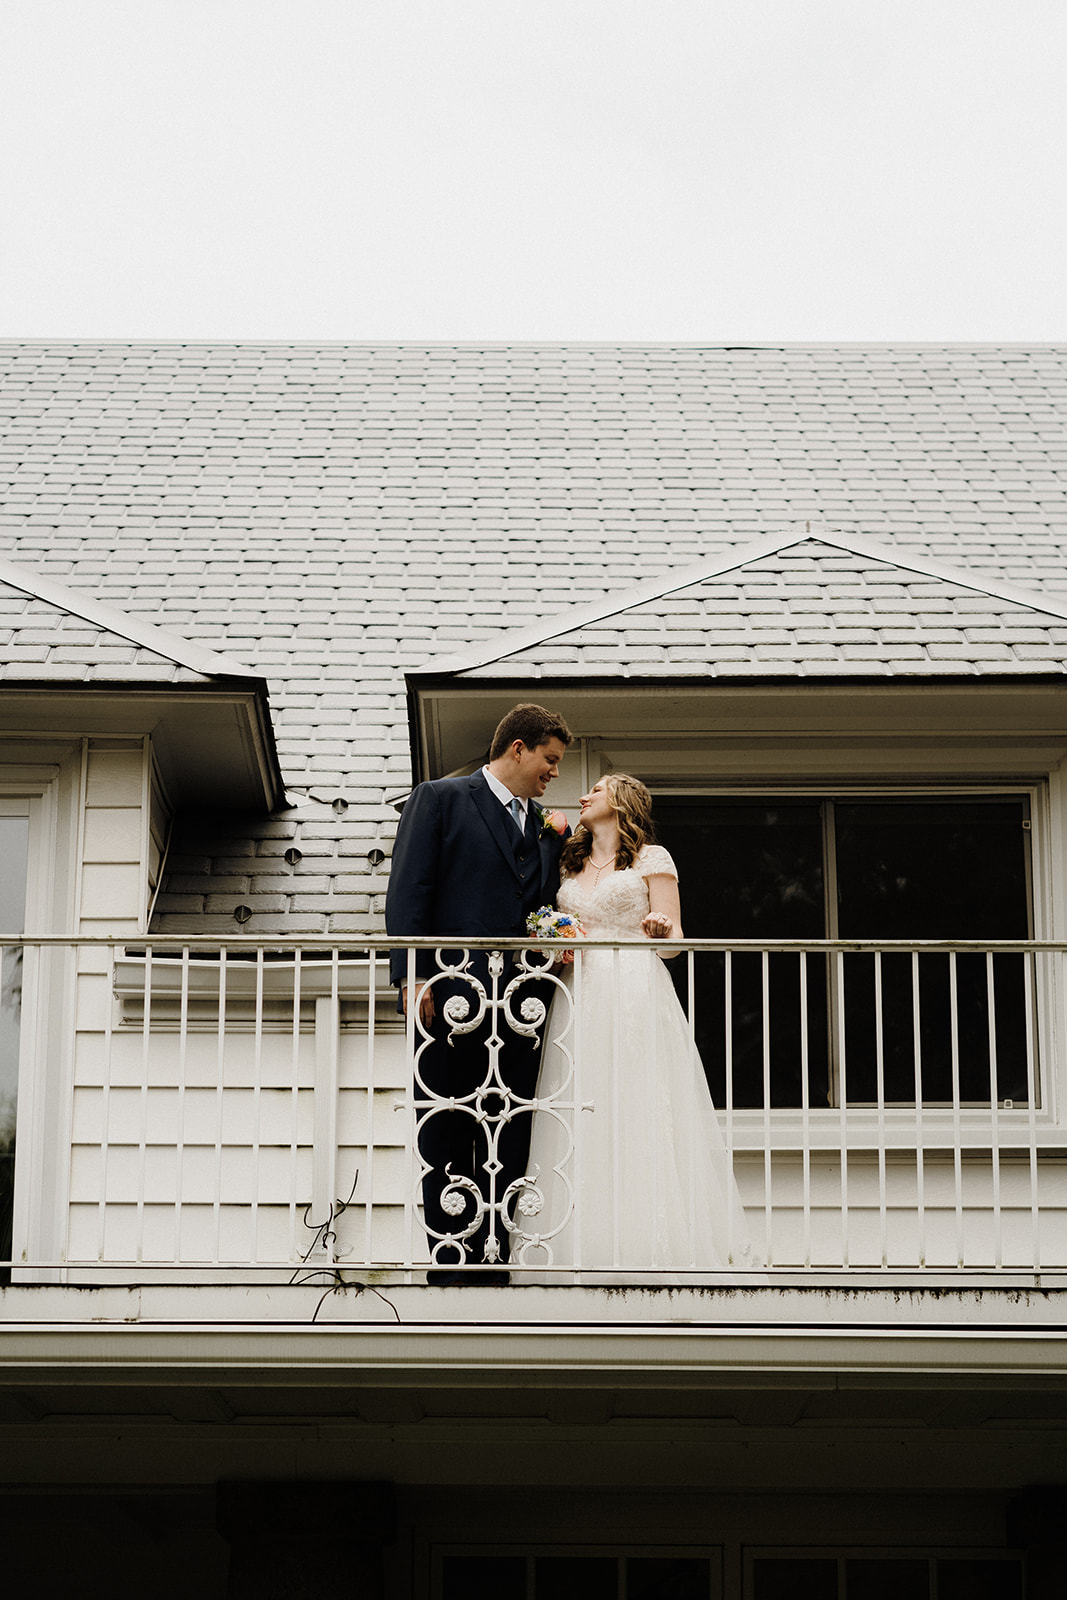 A bride and groom standing on the porch outside.